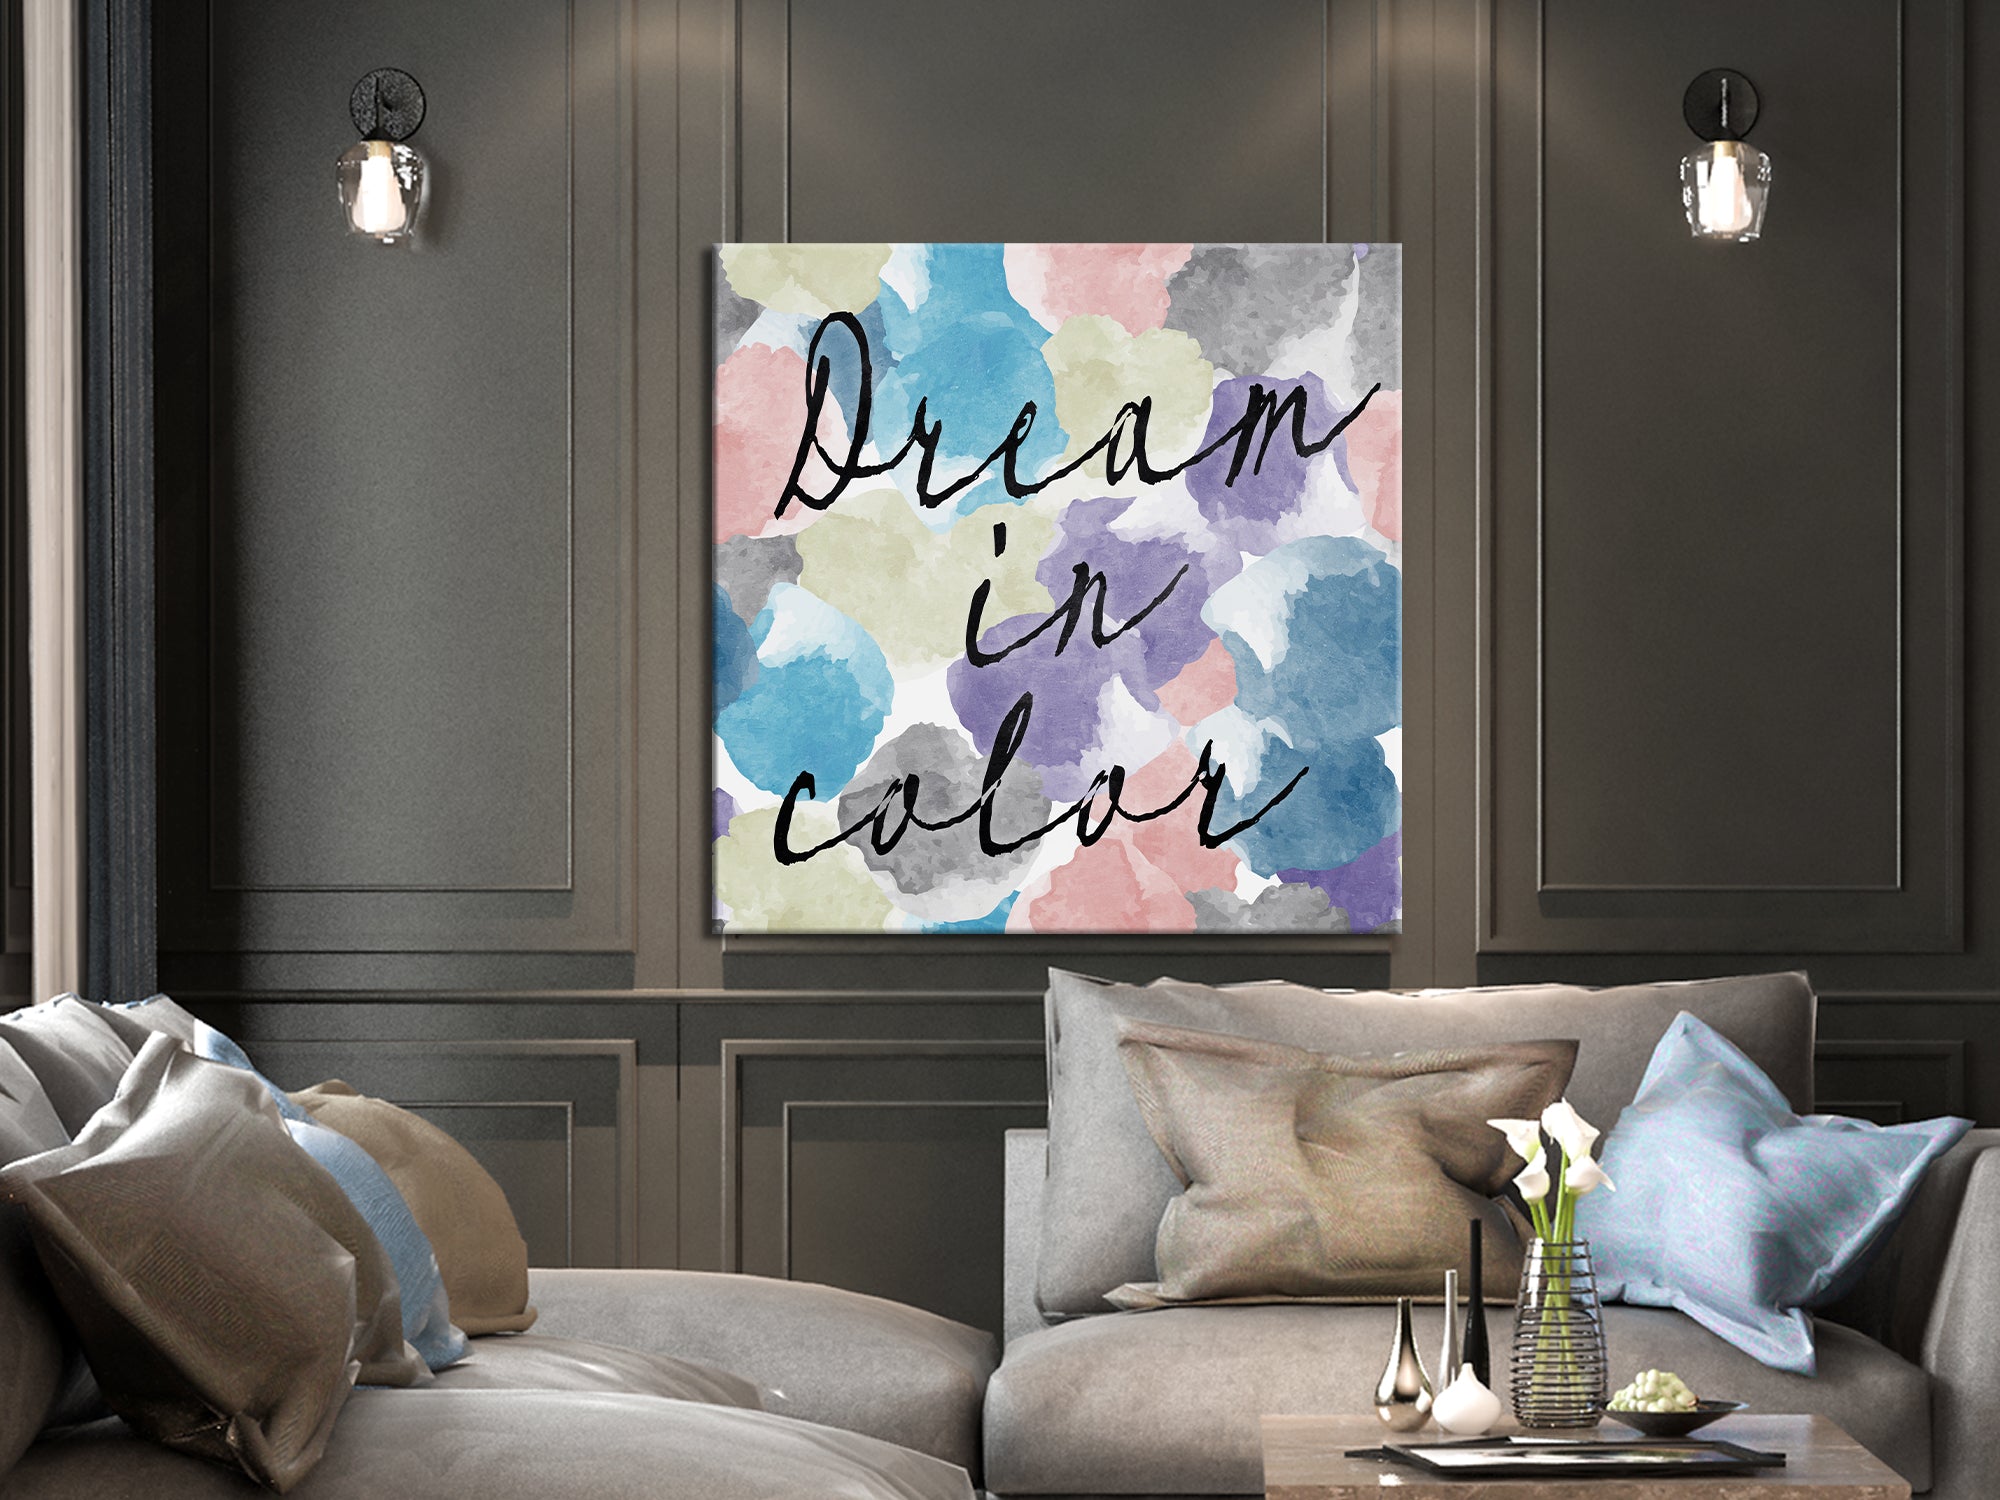 Dream In Color - Inspiring - Canvas Wall Art